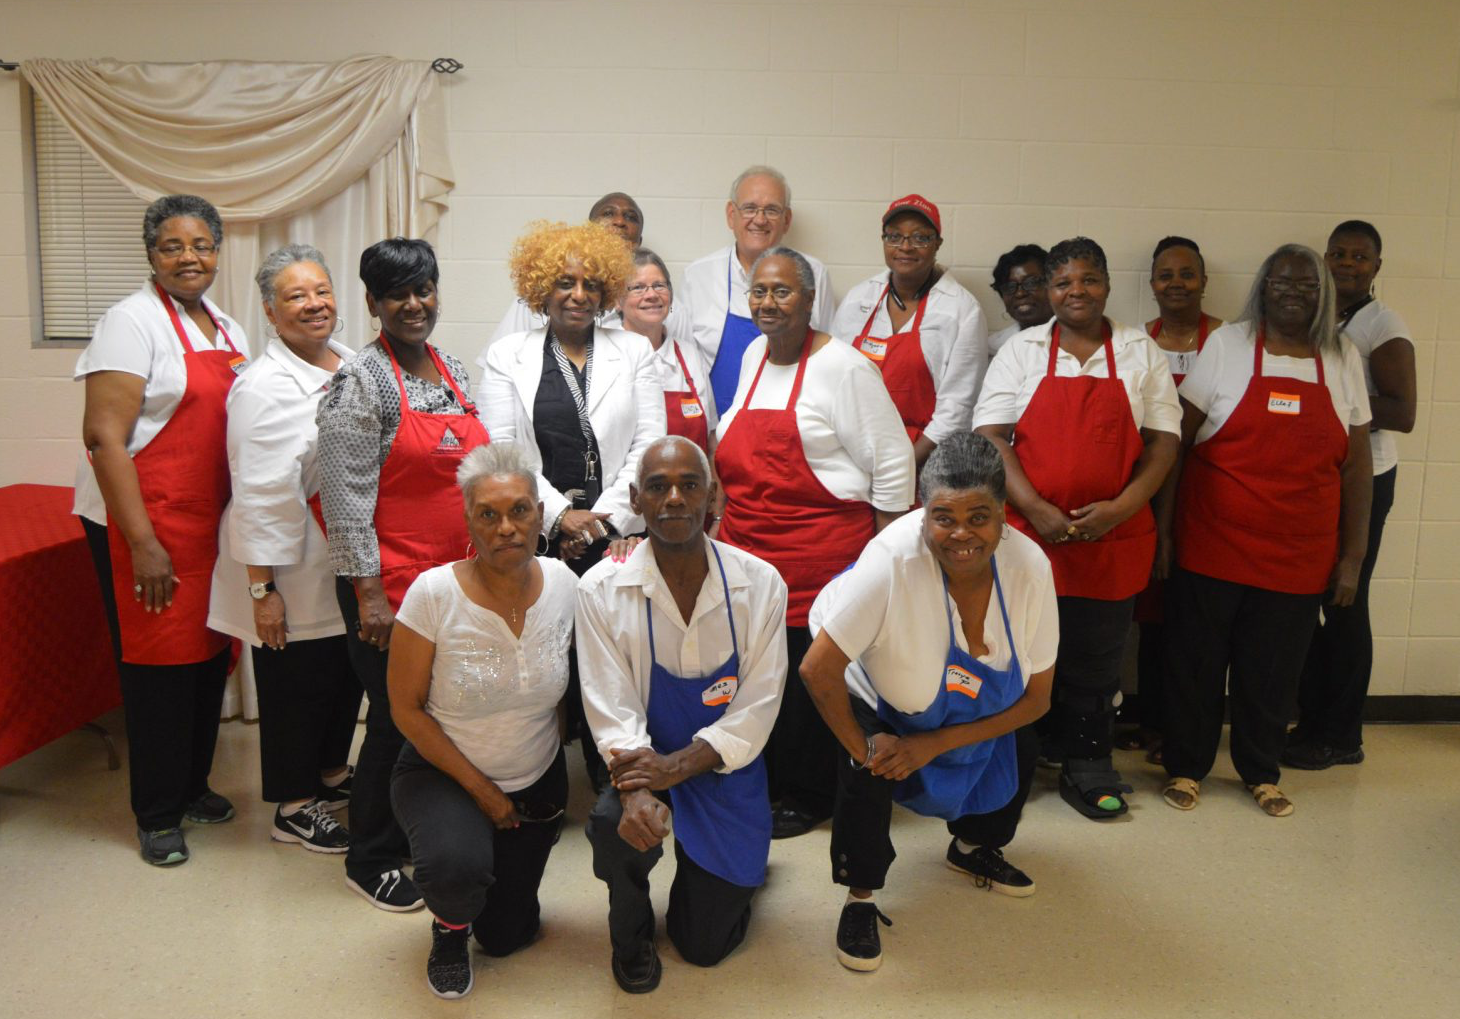 A group portrait of a HEAL Cooking Class in 2017.